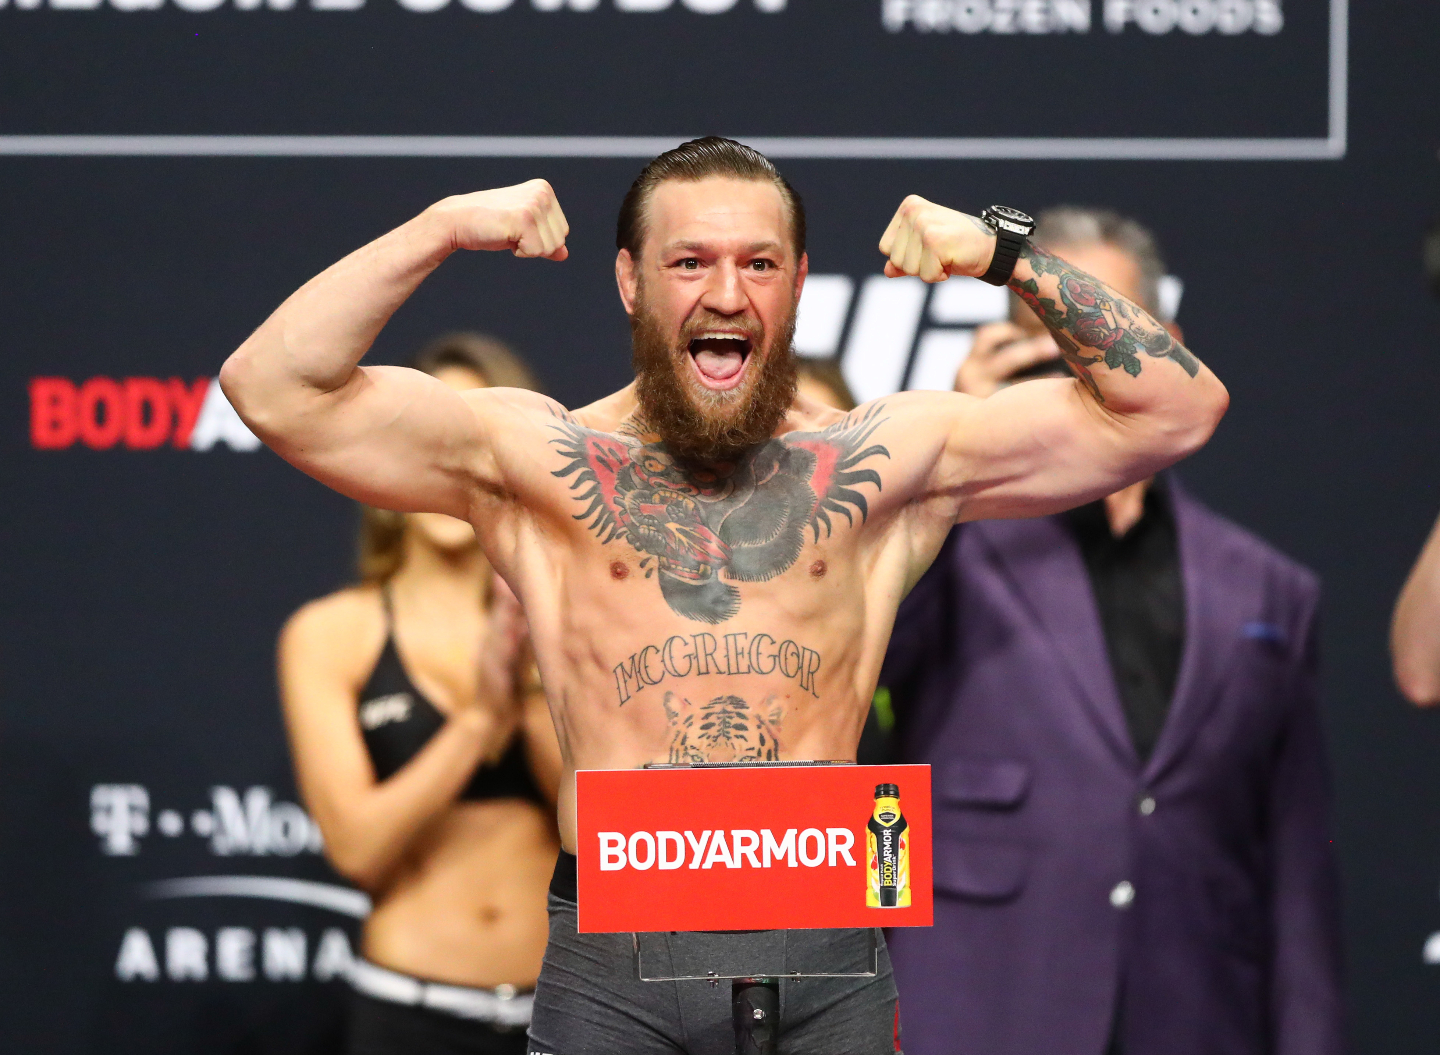 Conor McGregor and his incredible physical transformation

